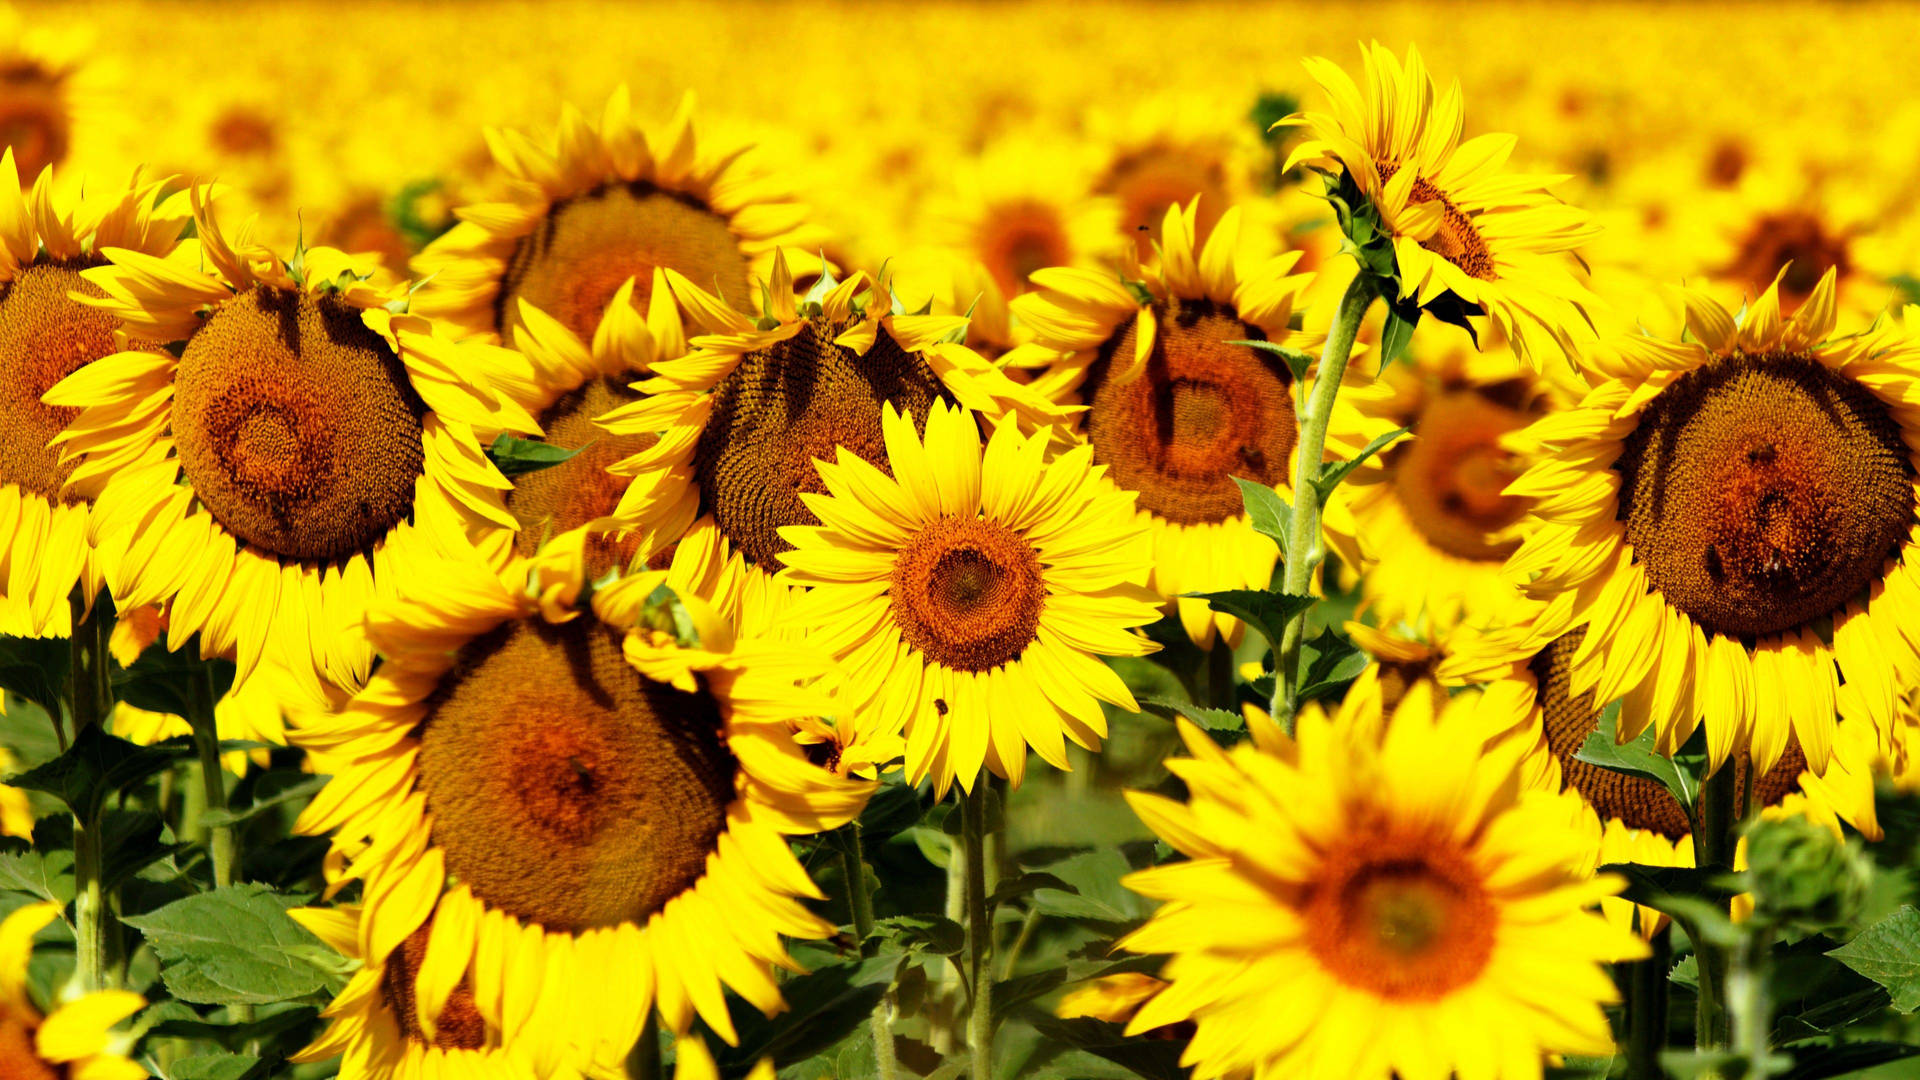 "Brighten up your day with the beauty of sunflowers and roses!" Wallpaper